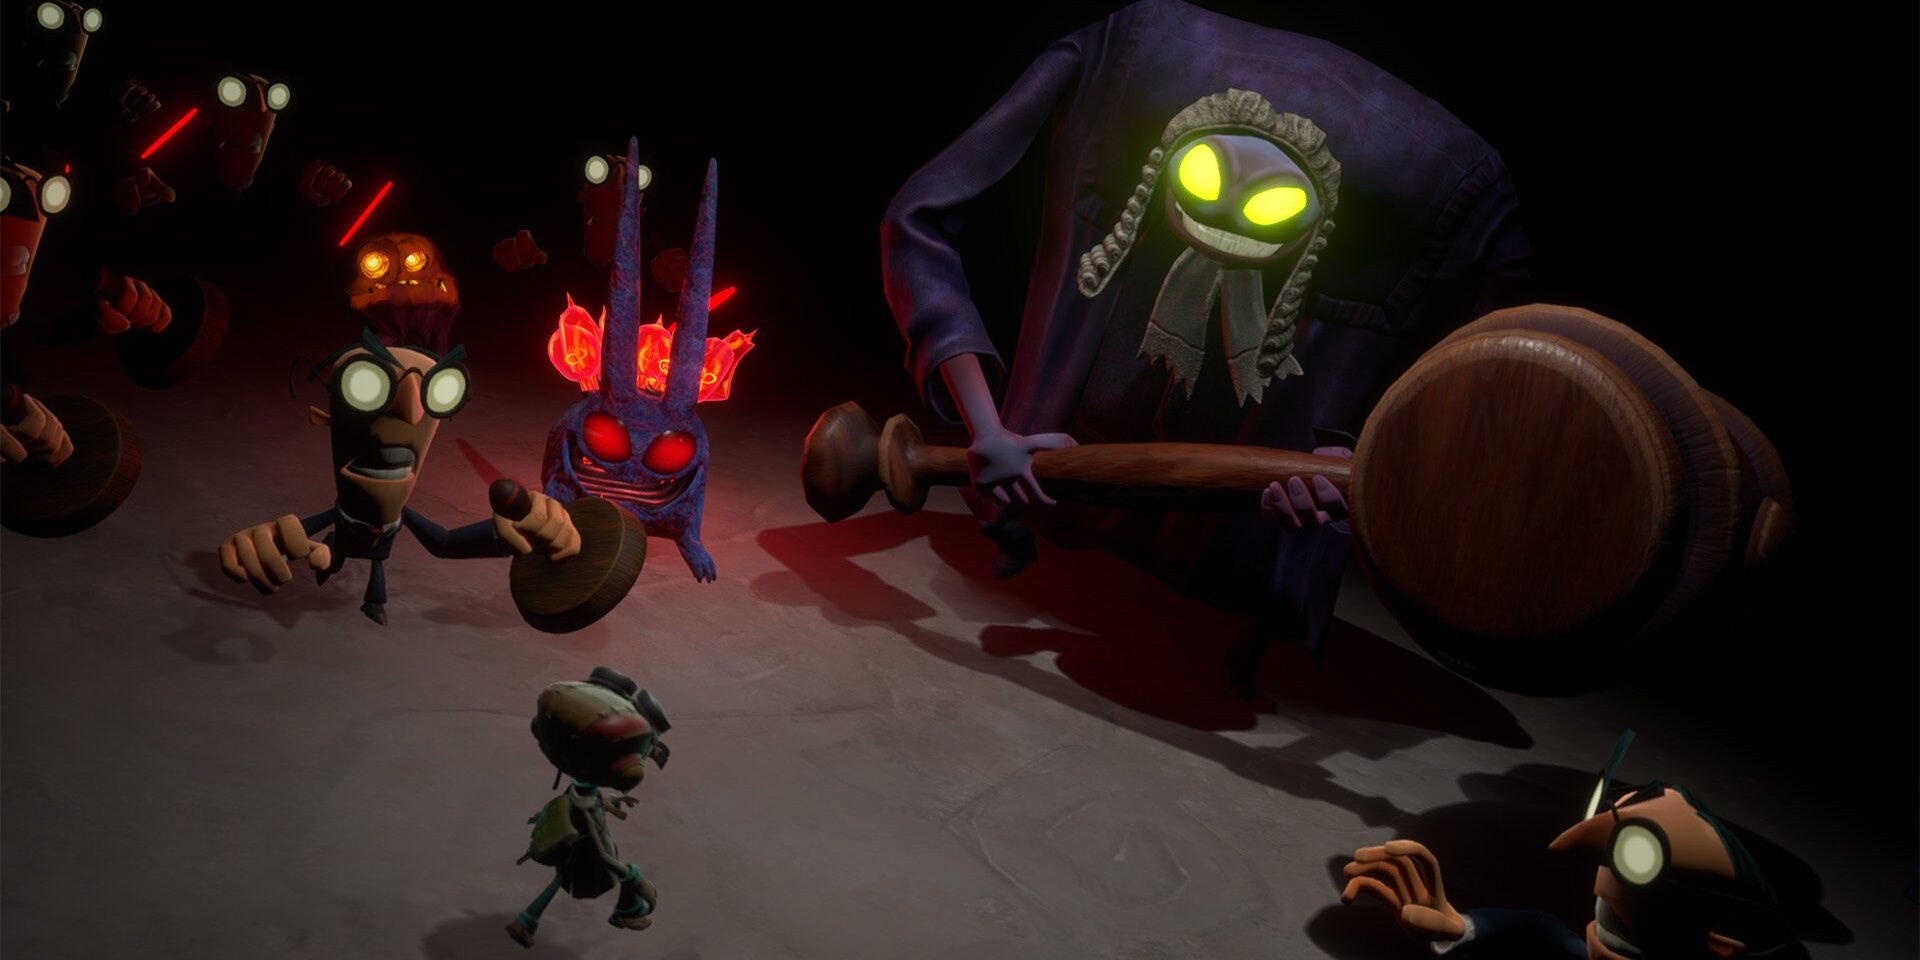 The Judge and various enemies from Psychonauts 2